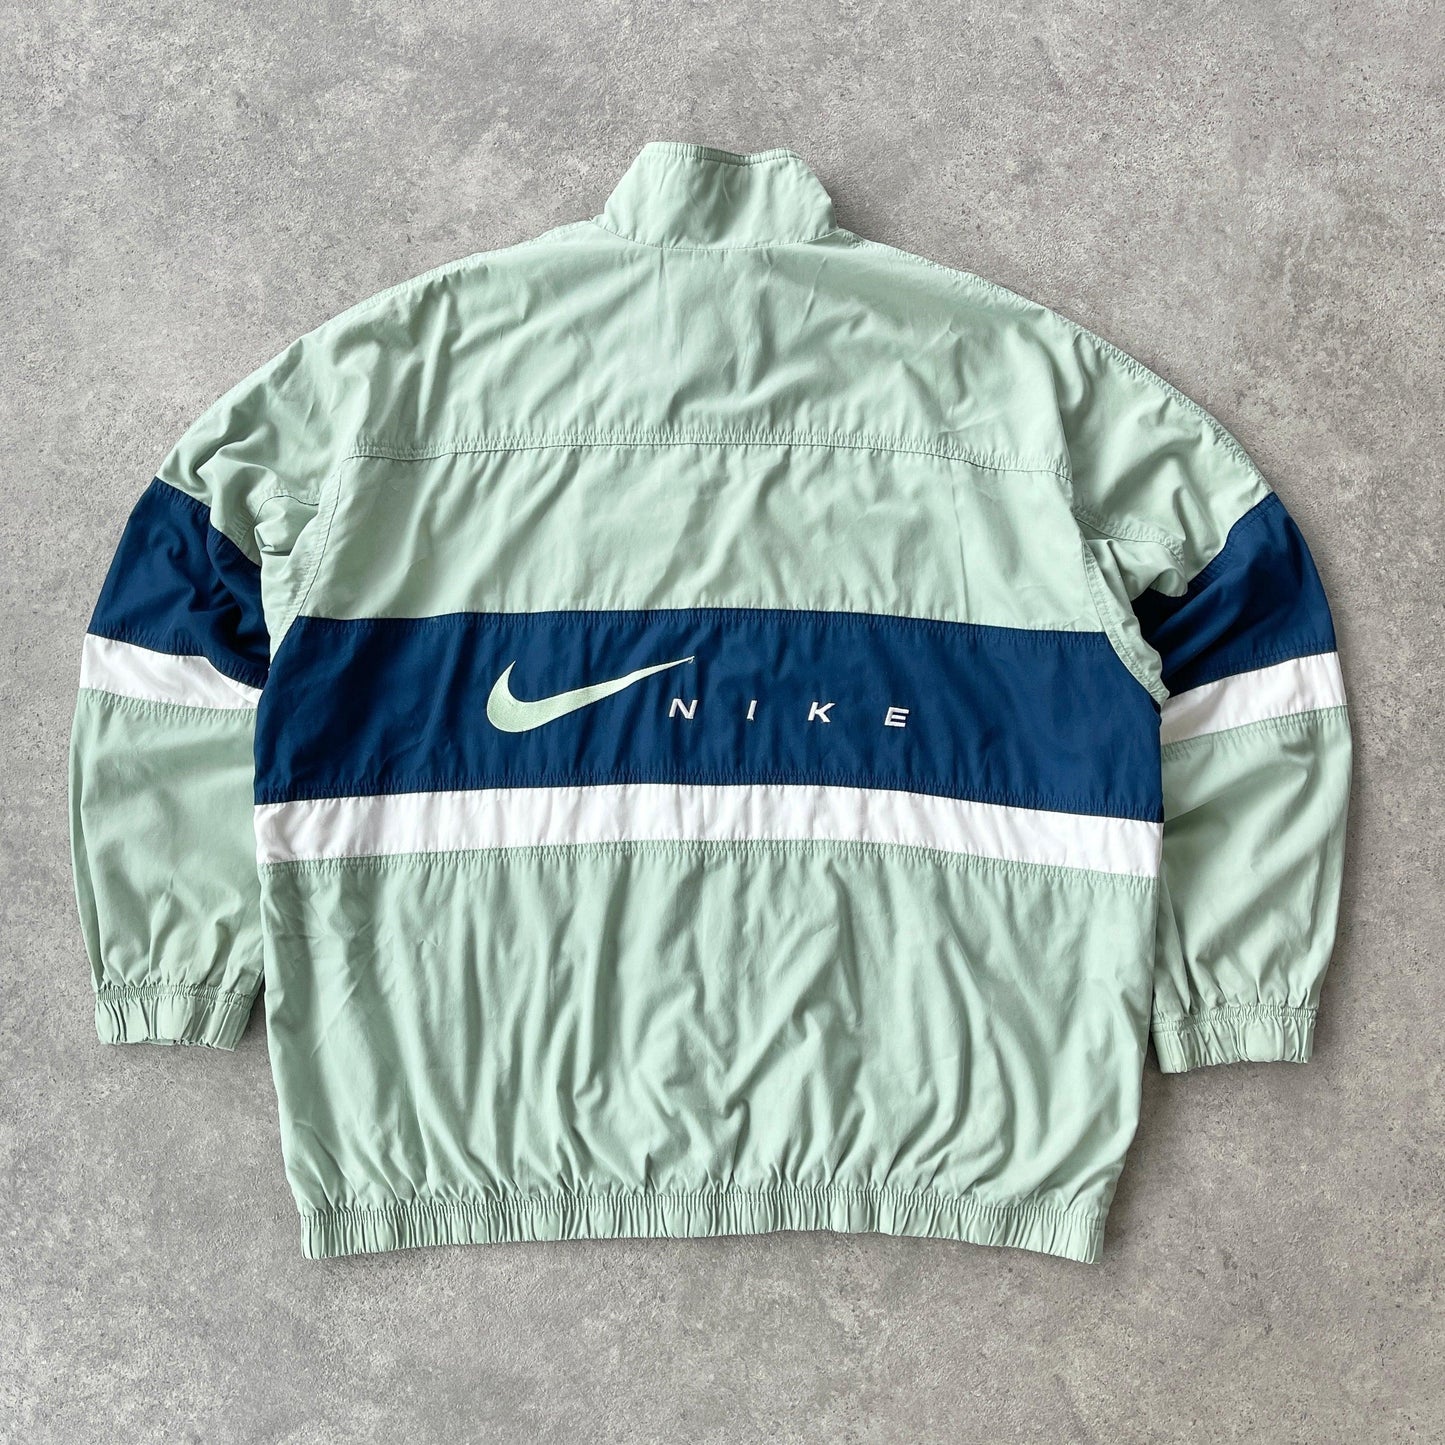 Nike 1990s lightweight embroidered track jacket (XL) - Known Source